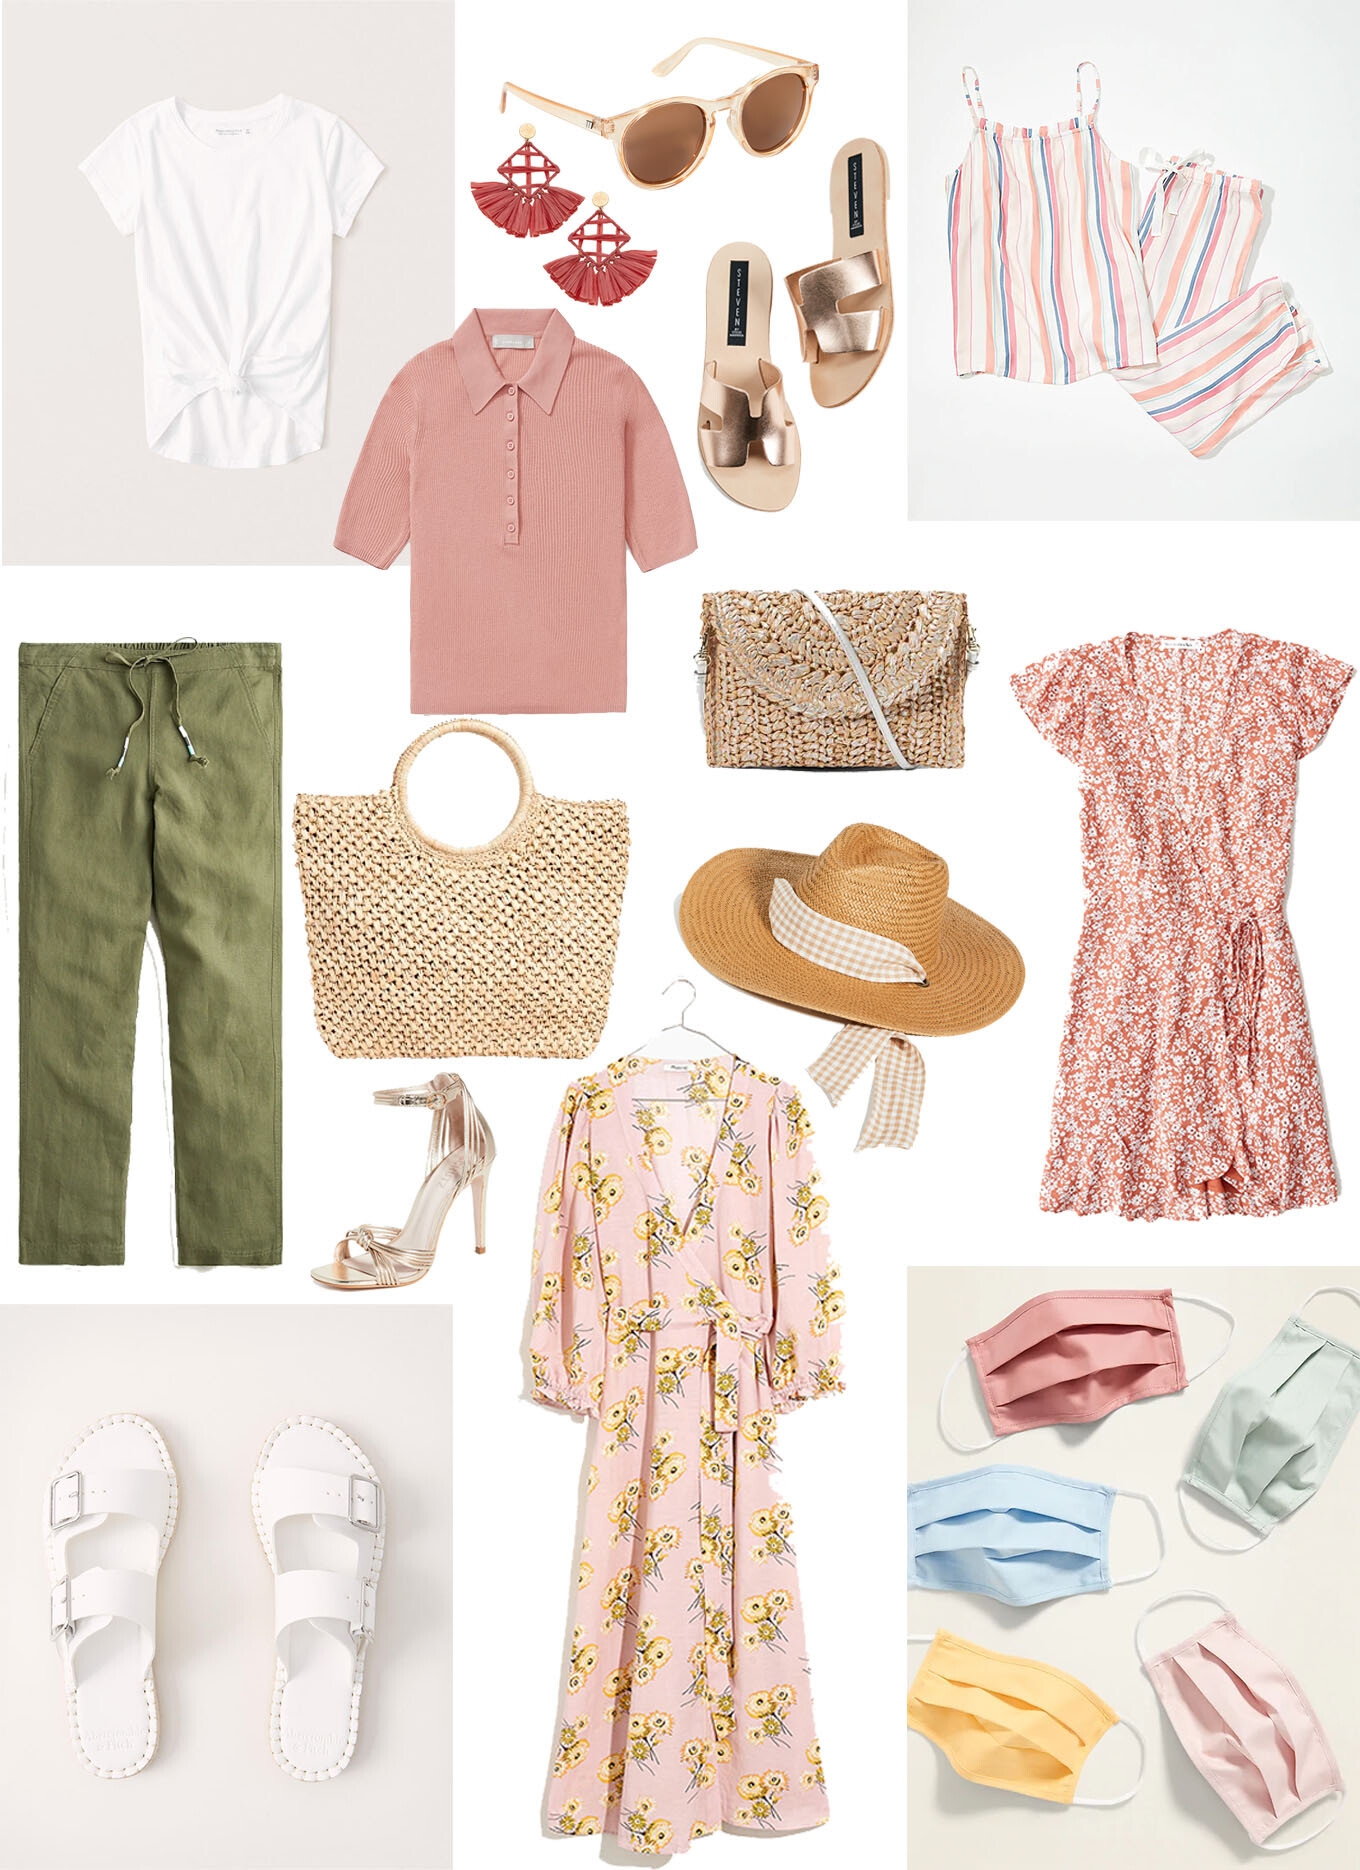 Looking to update your Summer Weekend Wardrobe? Then you will love these mix and match pieces all around or under $100. Grab them while they last!